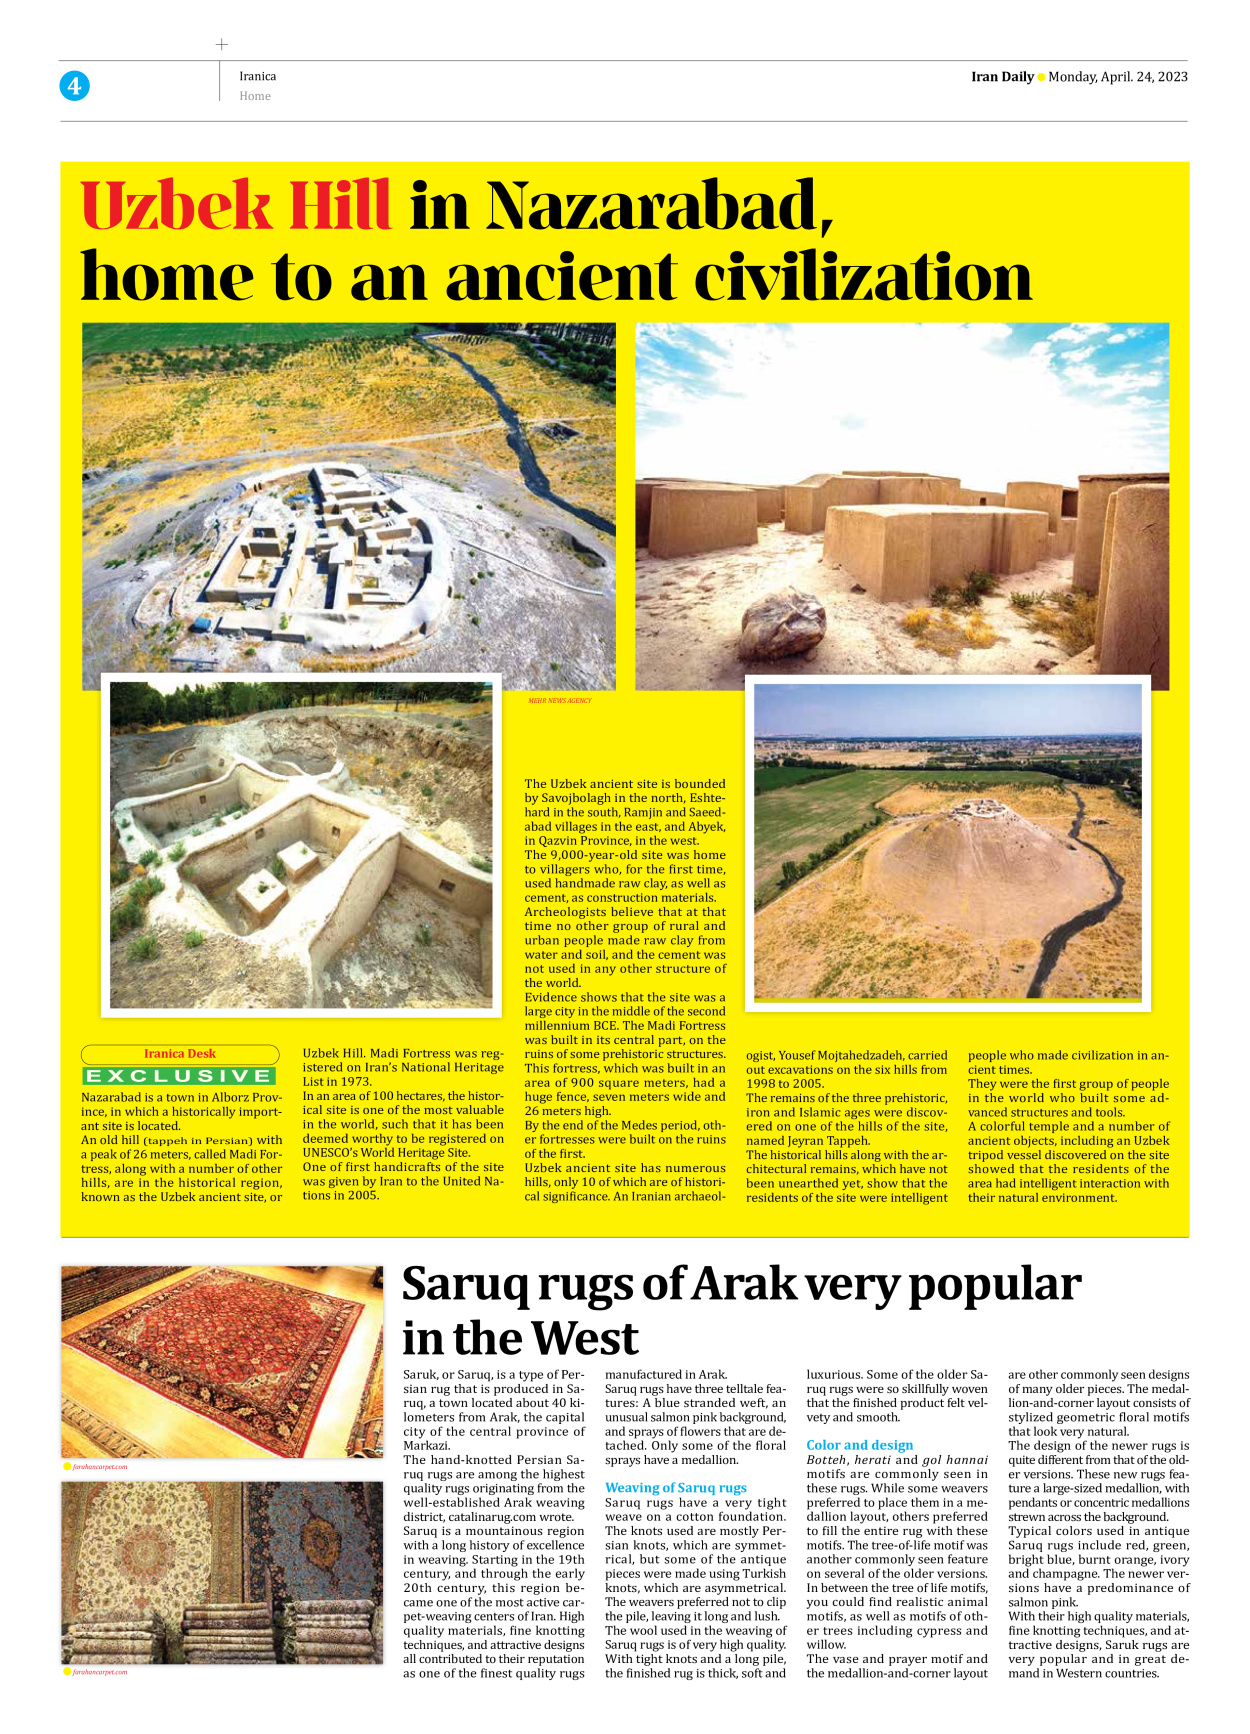 Iran Daily - Number Seven Thousand Two Hundred and Seventy Four - 24 April 2023 - Page 4